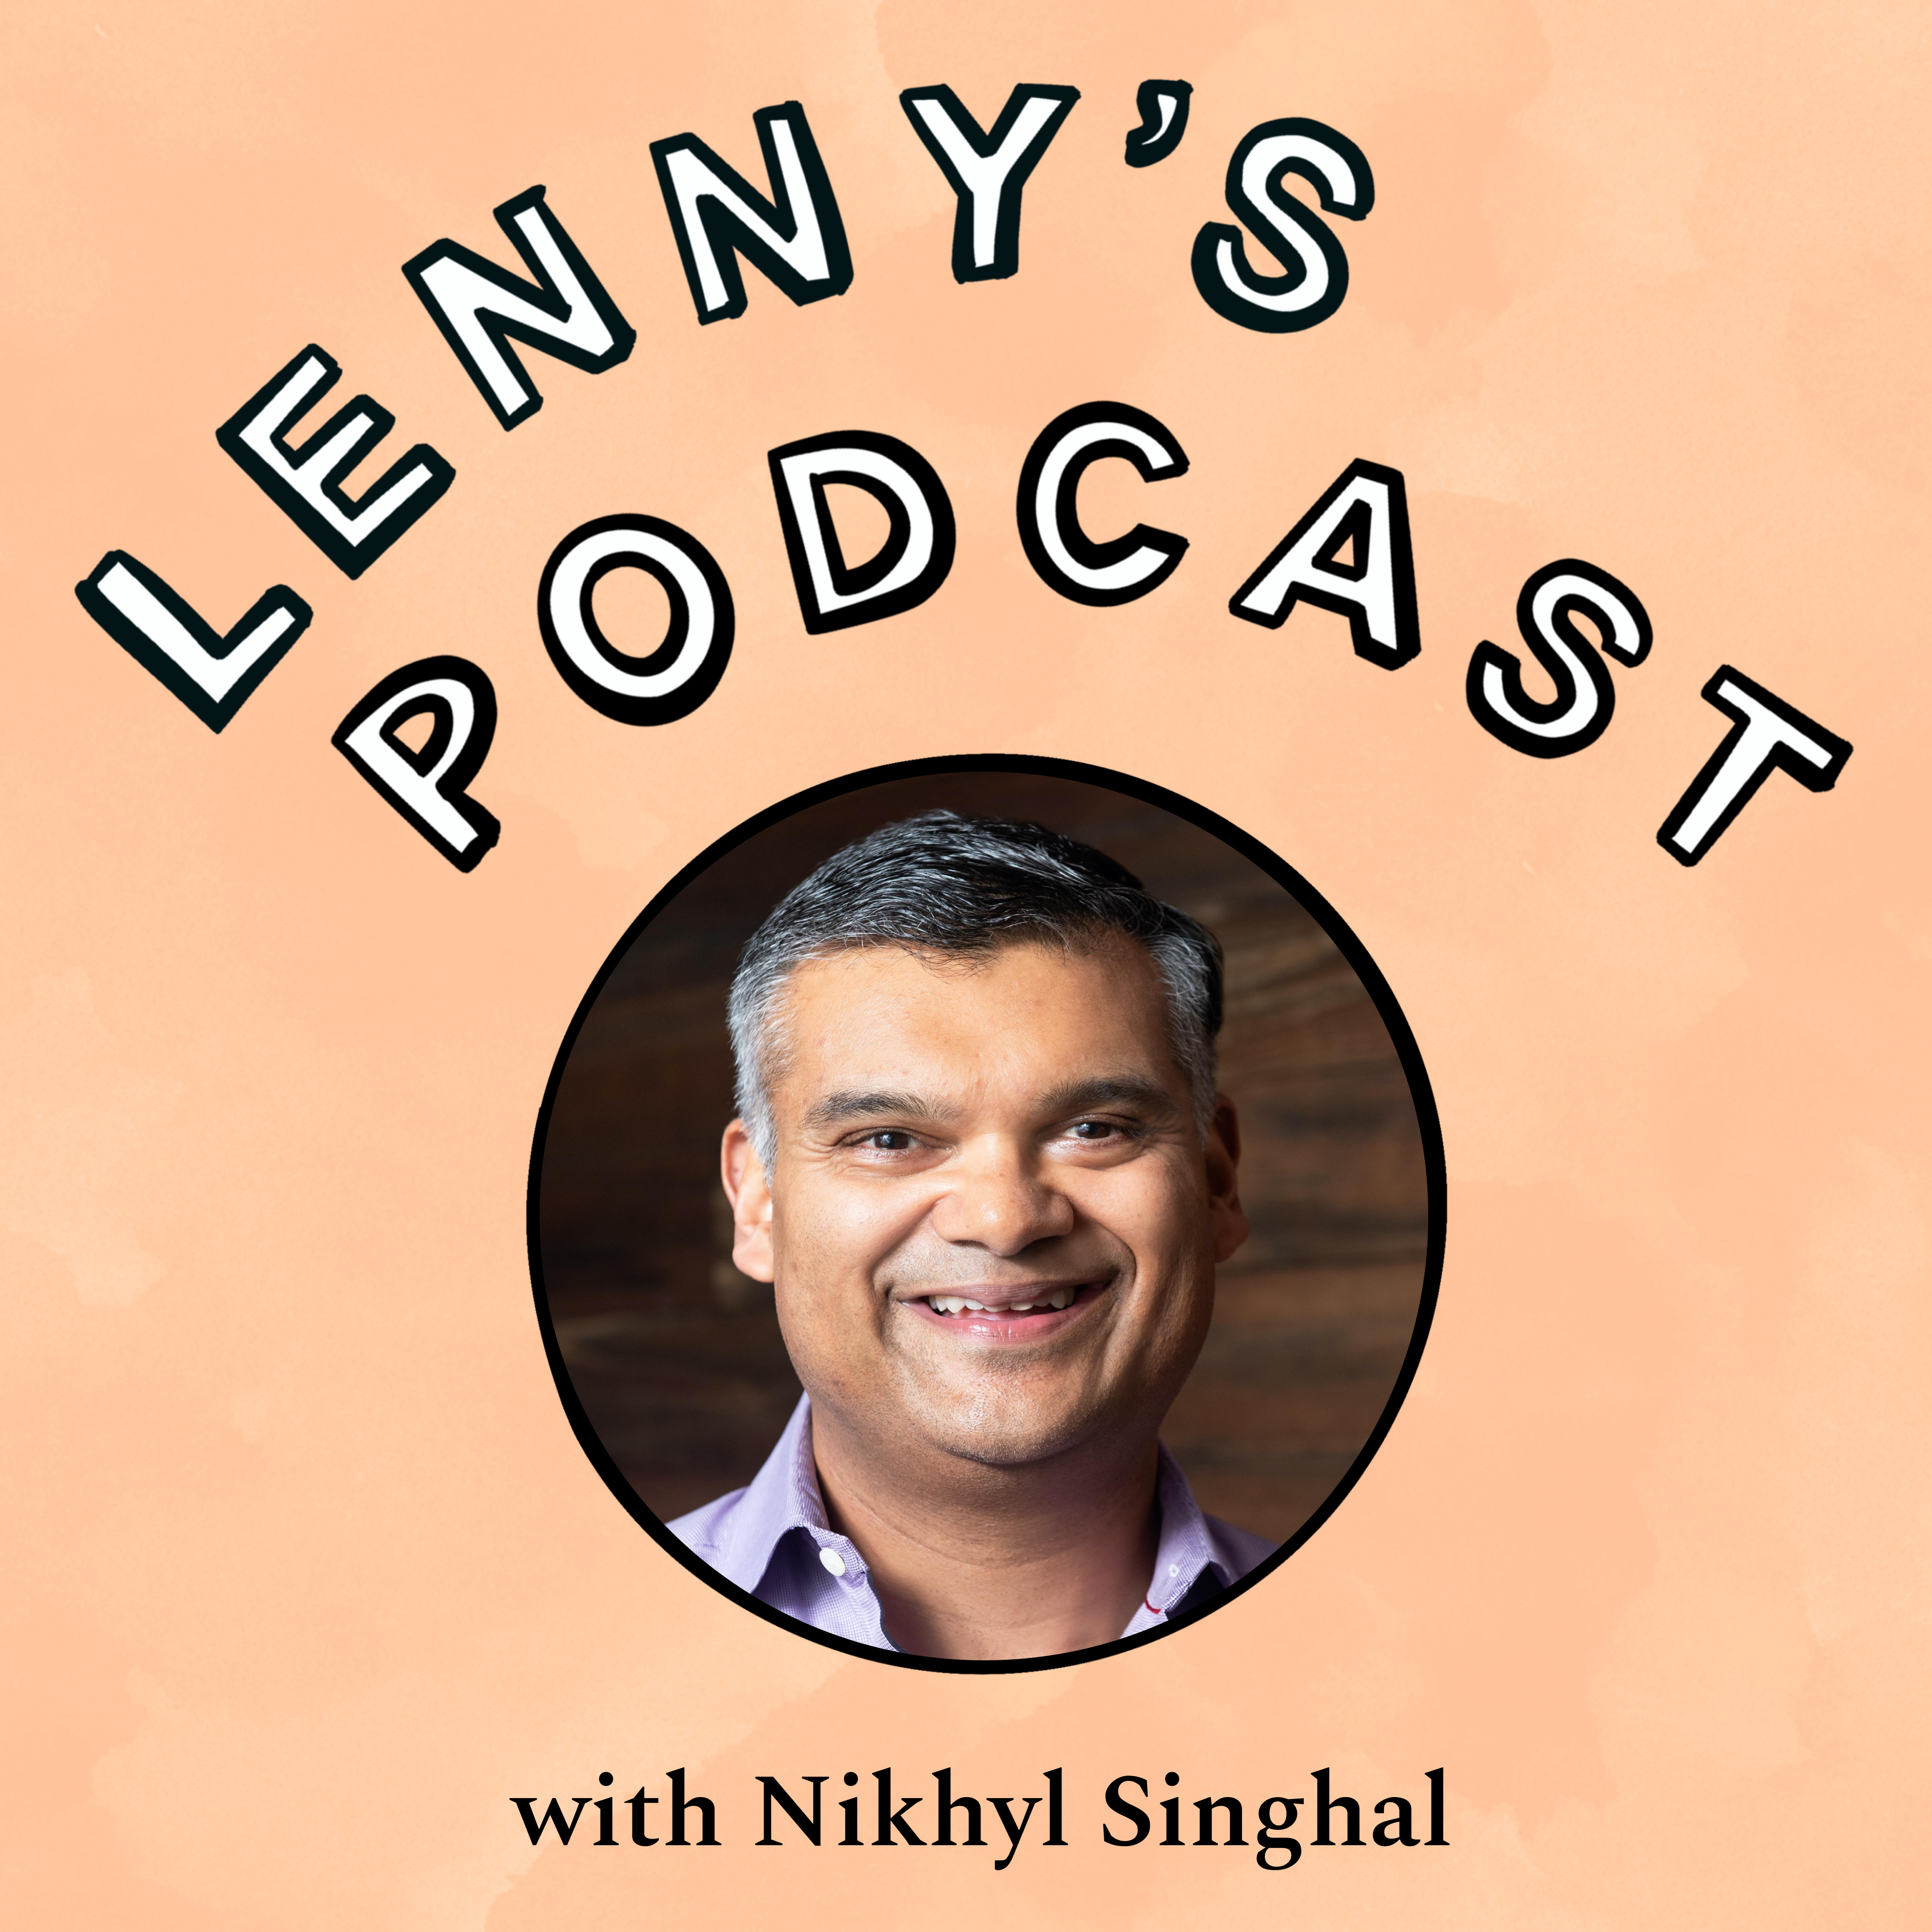 Building a long and meaningful career | Nikhyl Singhal (Meta, Google)